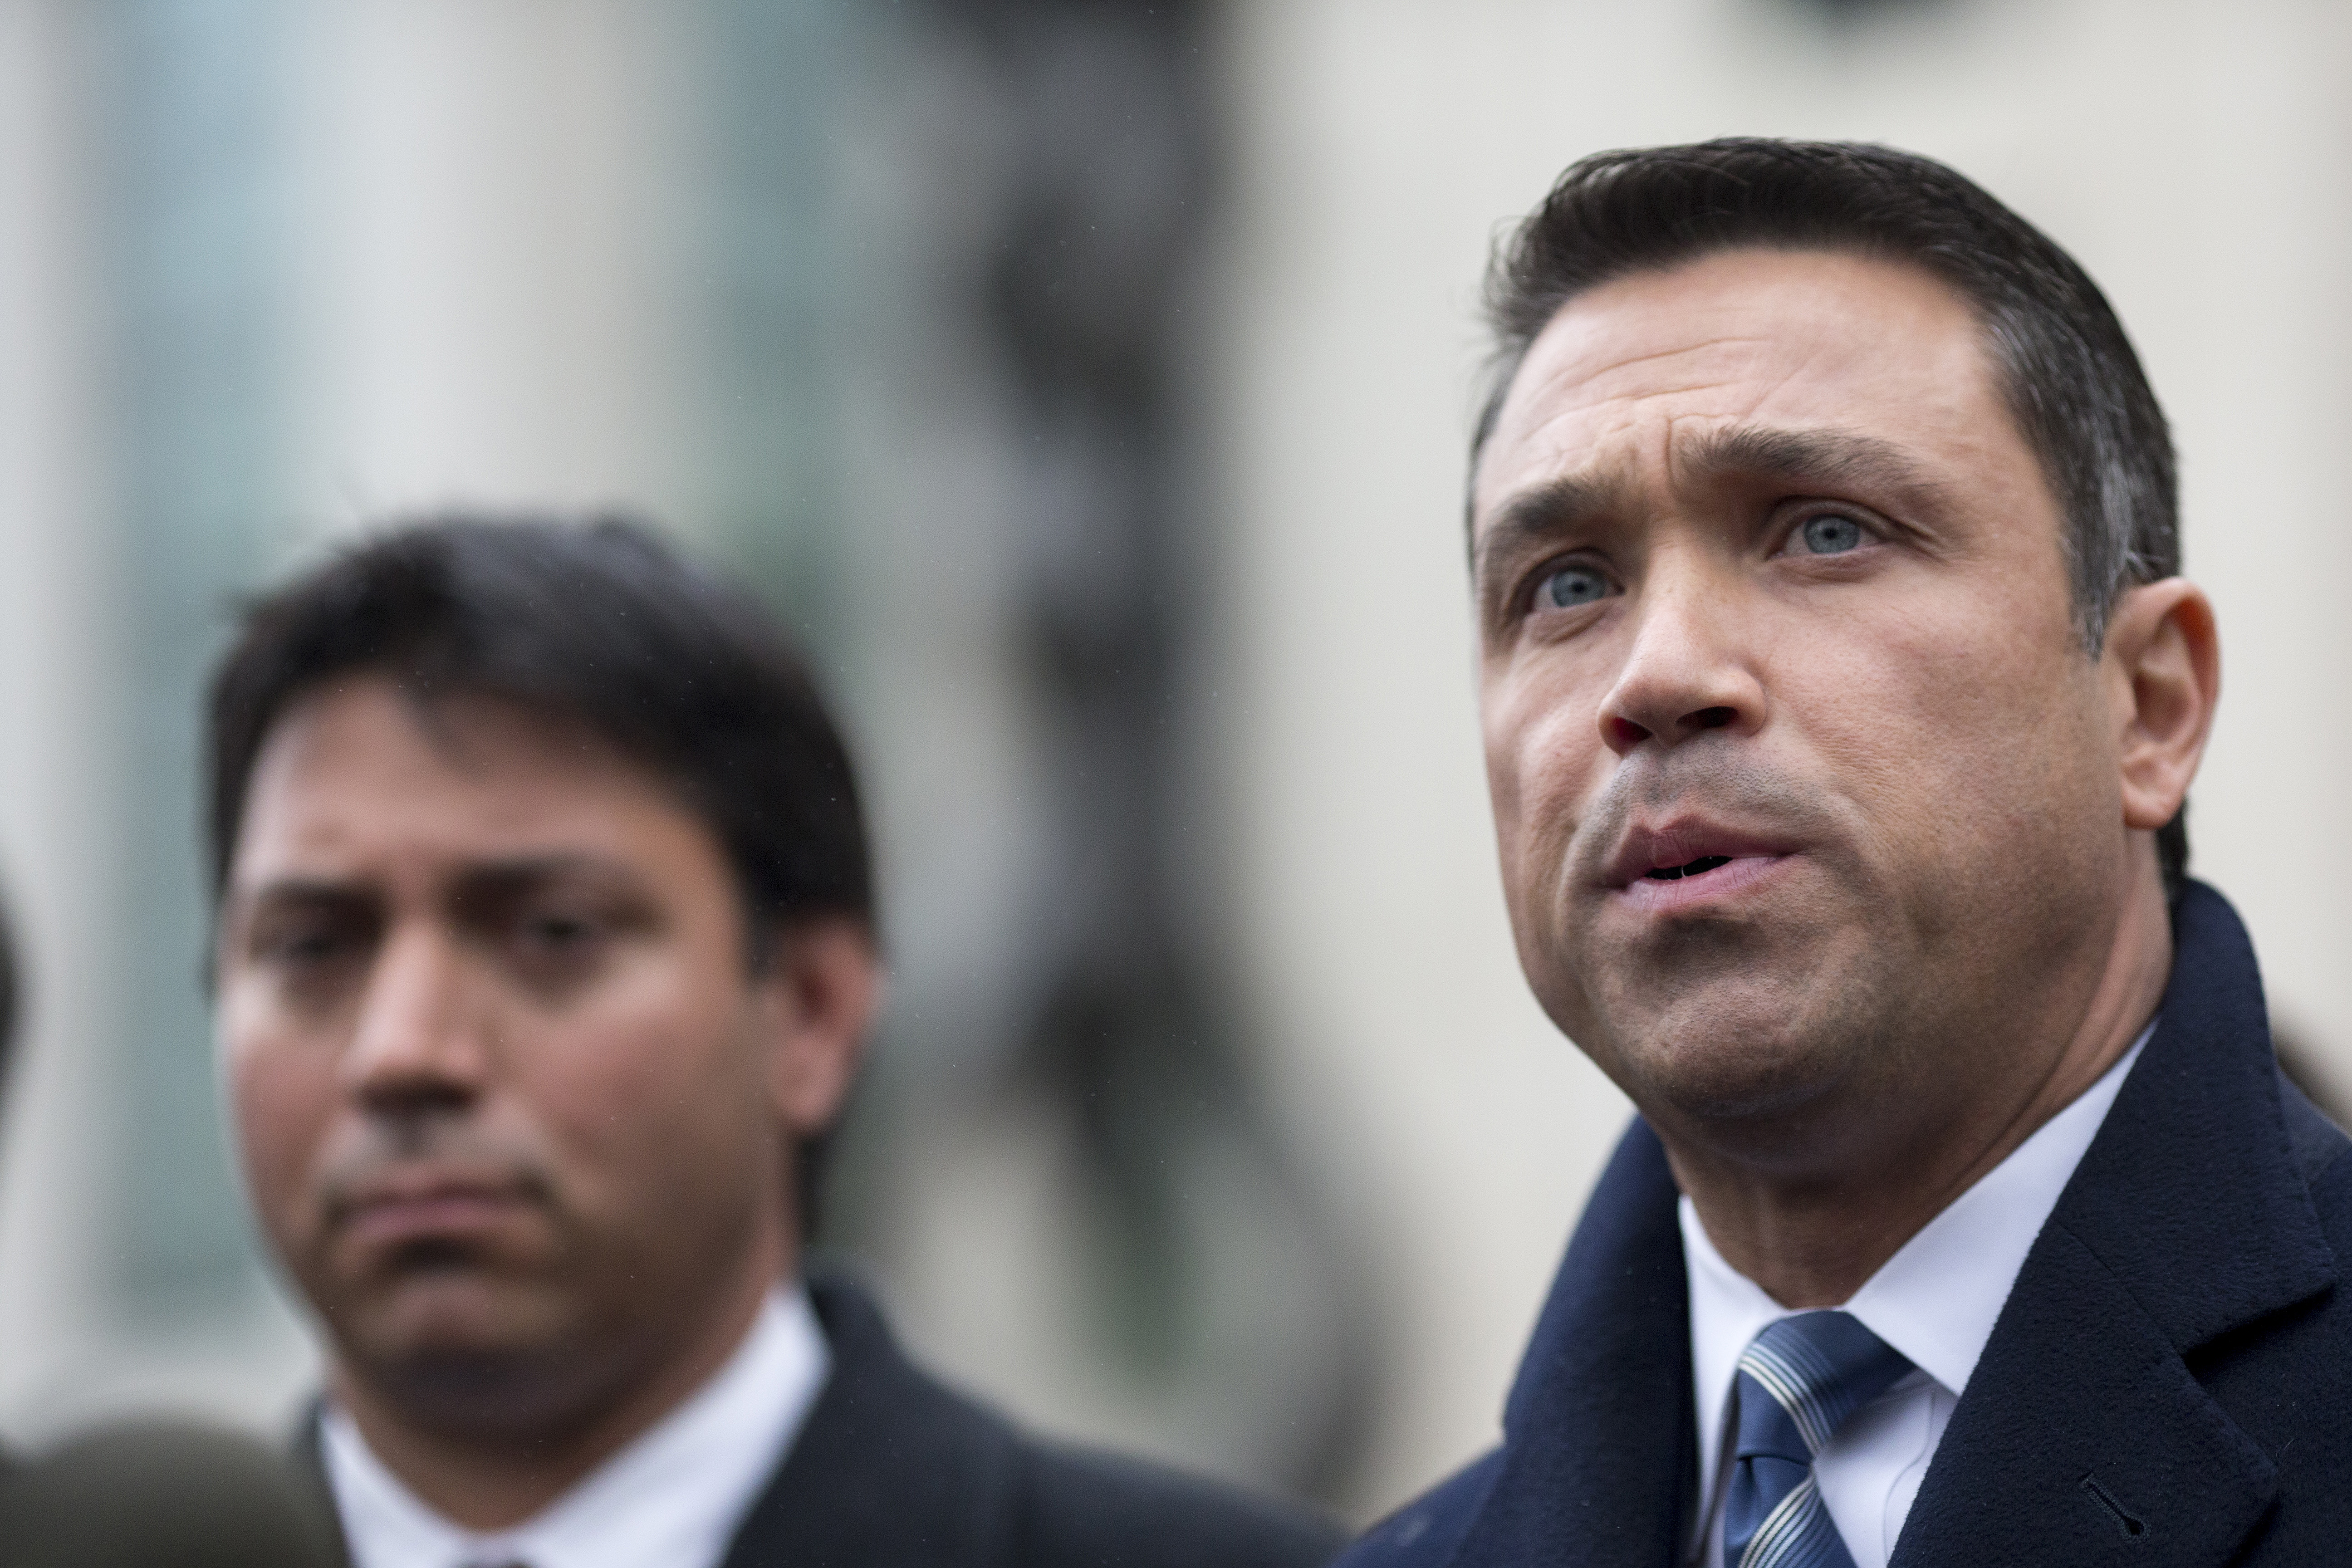 Former congressman Michael Grimm speaks to the media outside US District Court in Brooklyn, NY on December 23, 2014.  (Photo: Michael Graae/Getty Images)